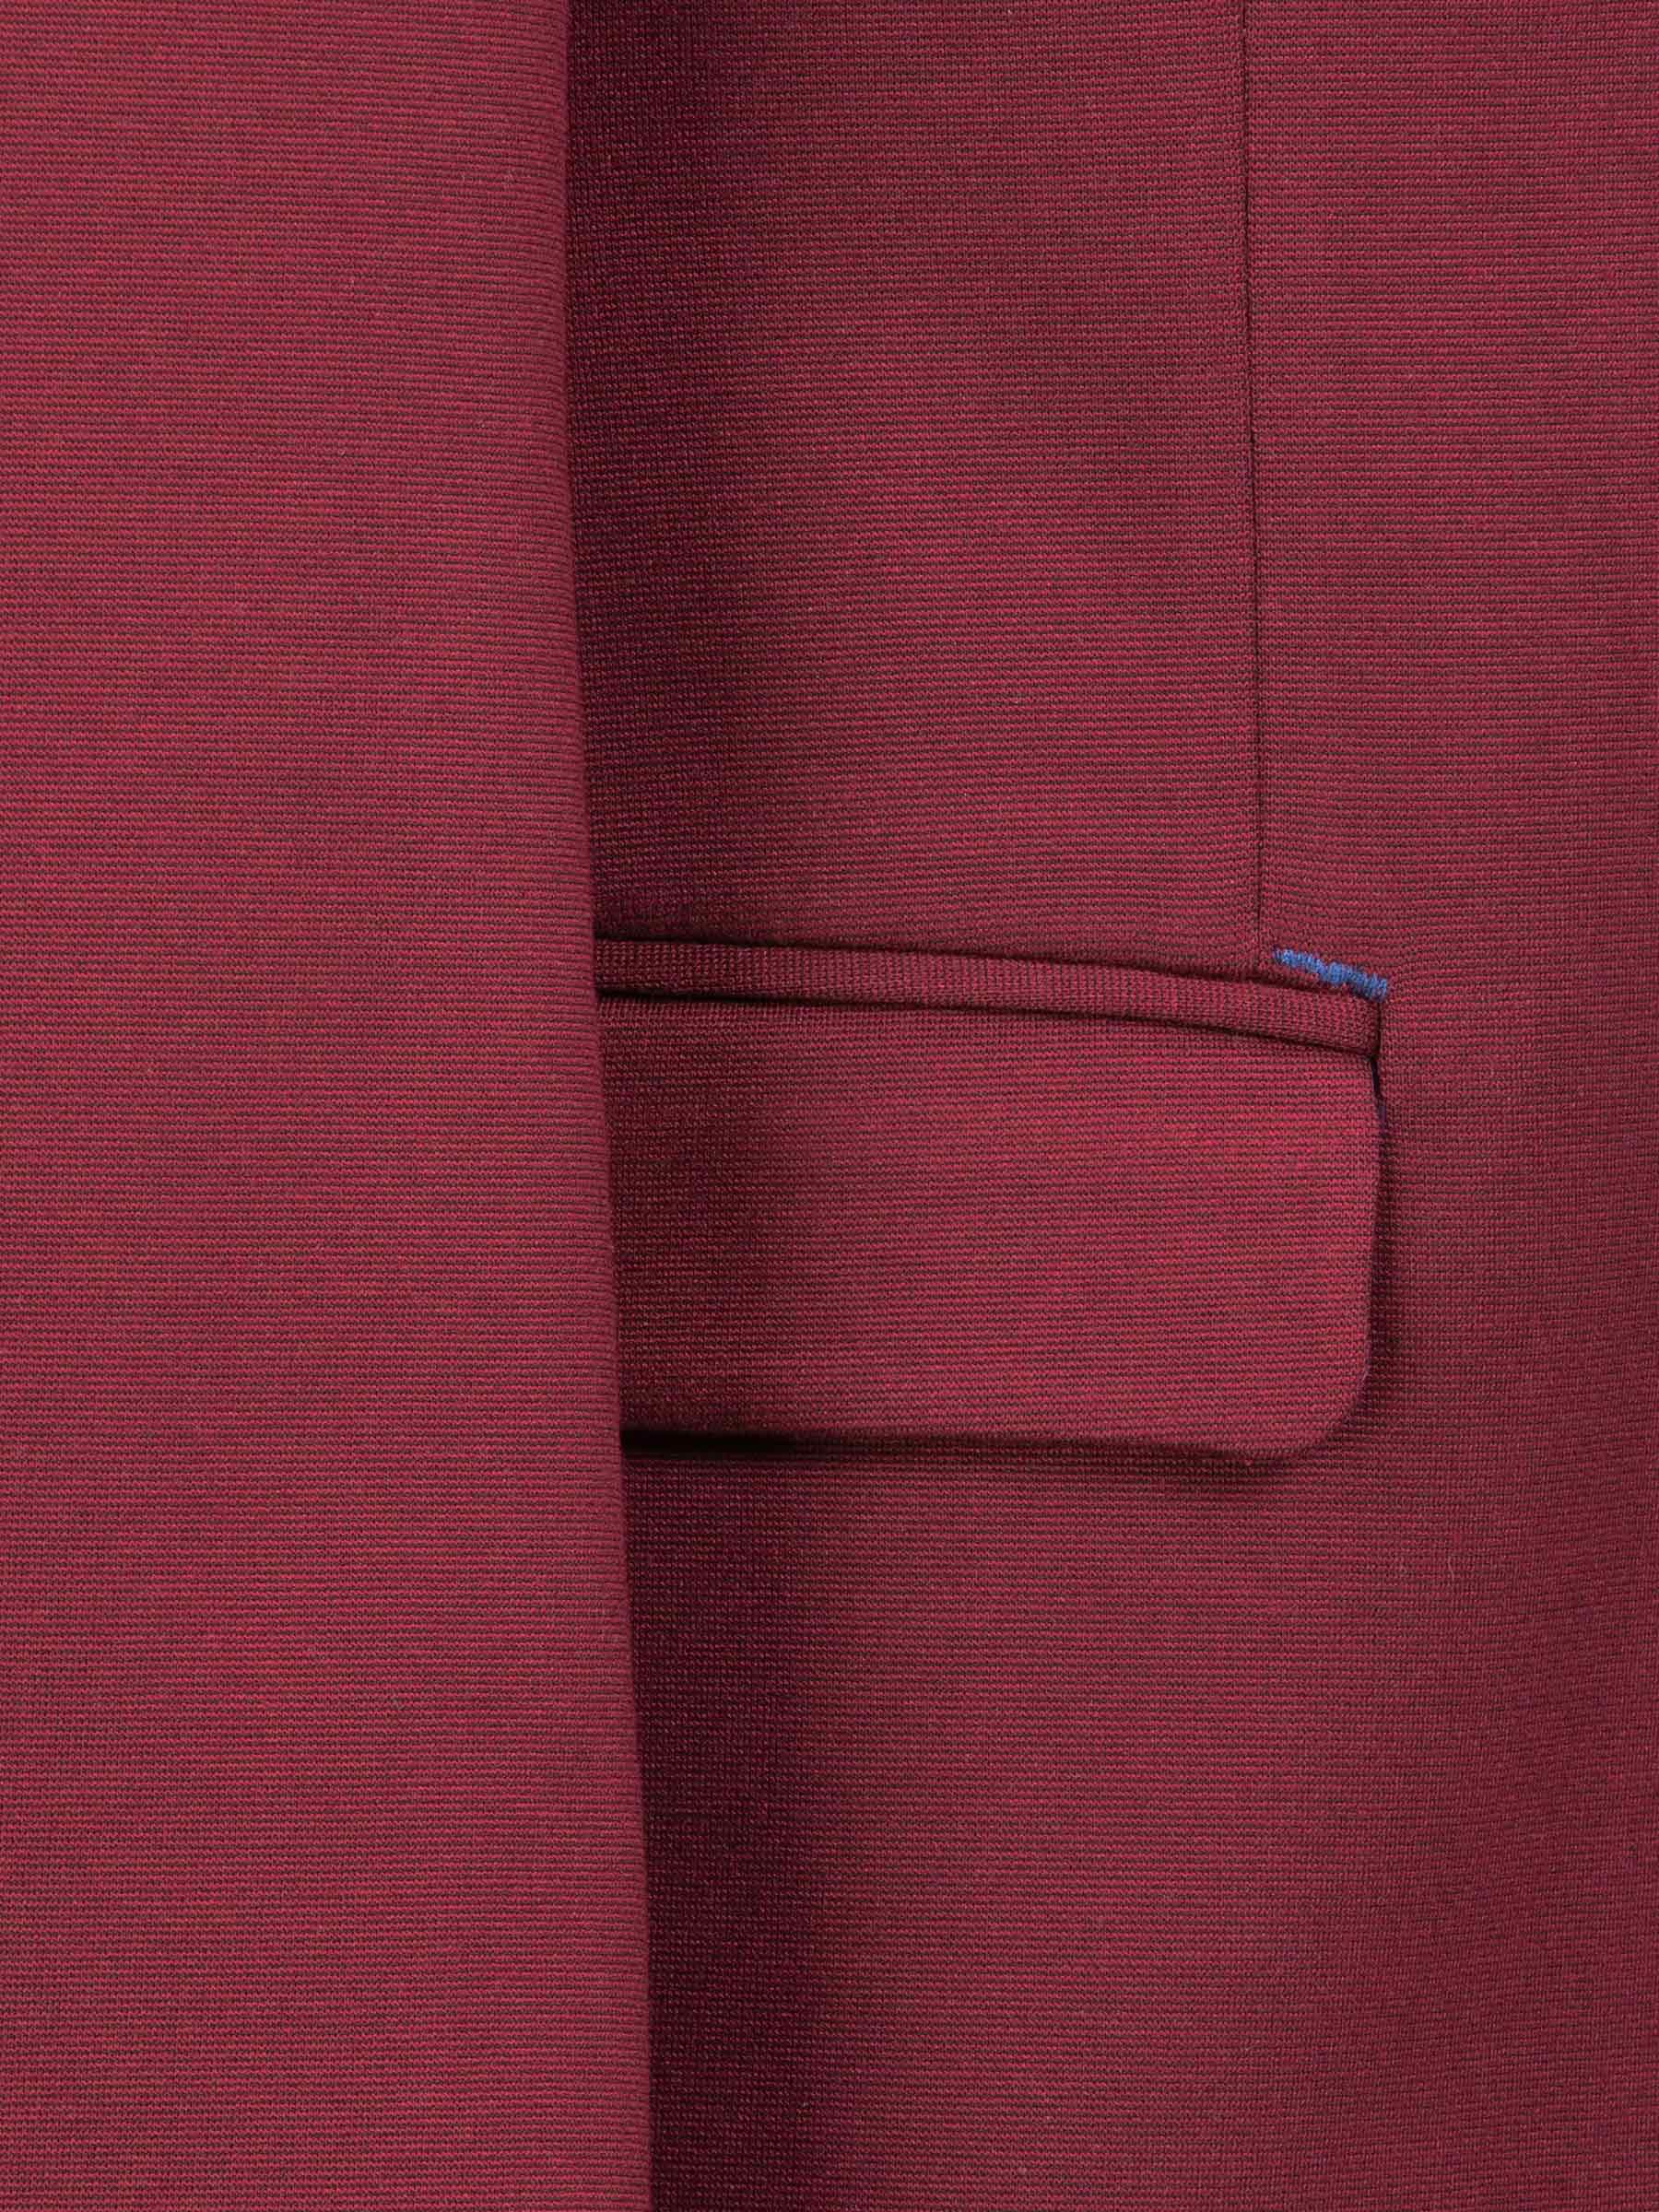 Relaxed Slim Fit Monarch Dark Red Colbert